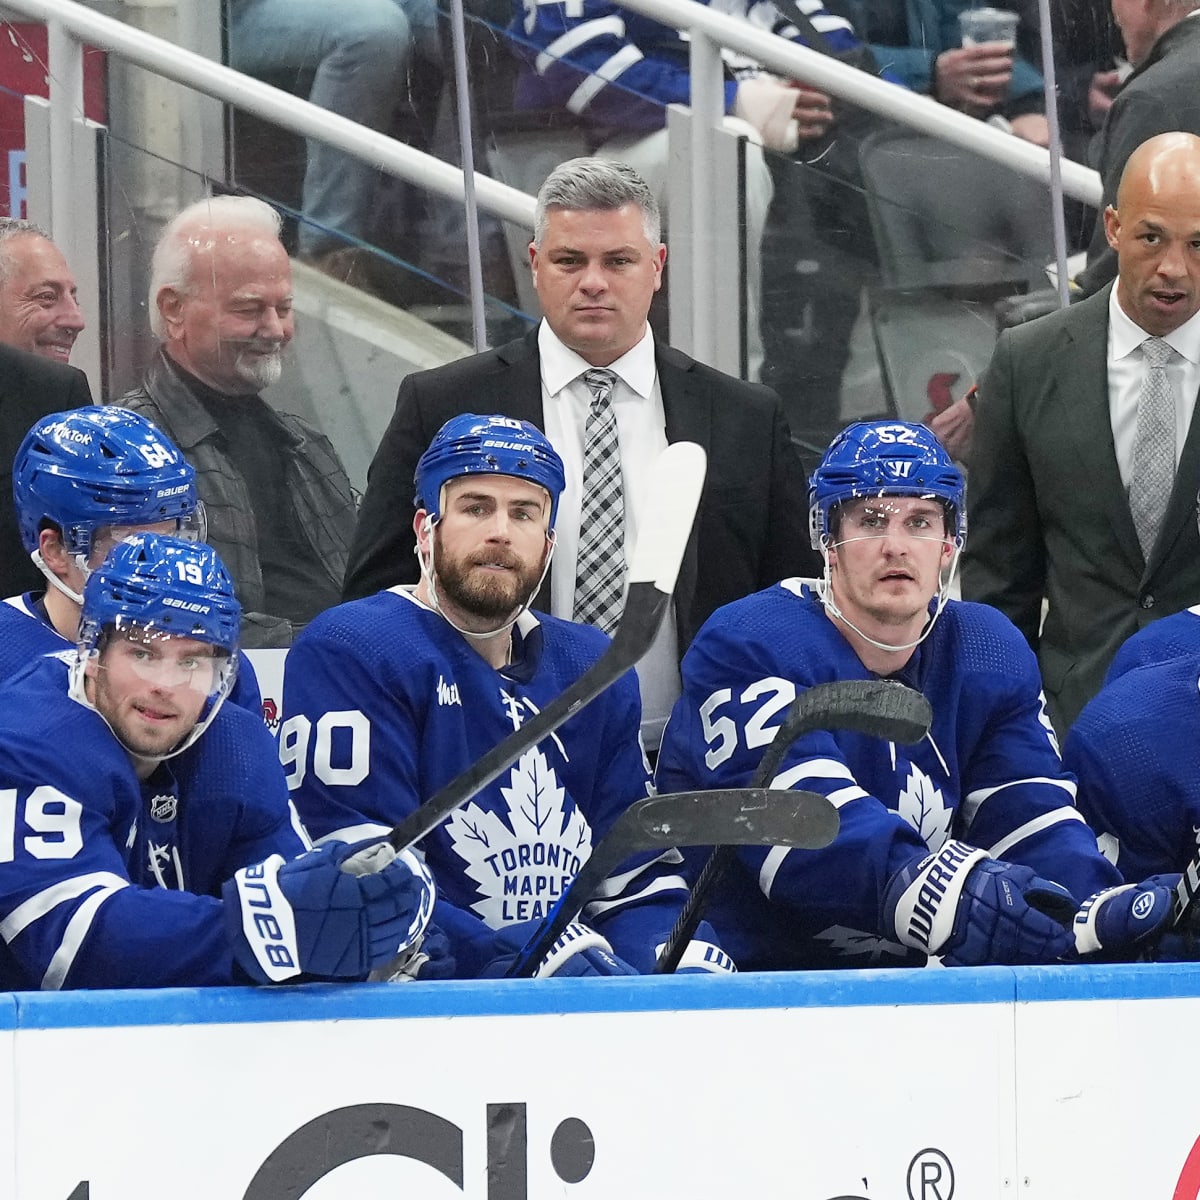 Must-Haves Items for Toronto Maple Leafs Fans in 2021